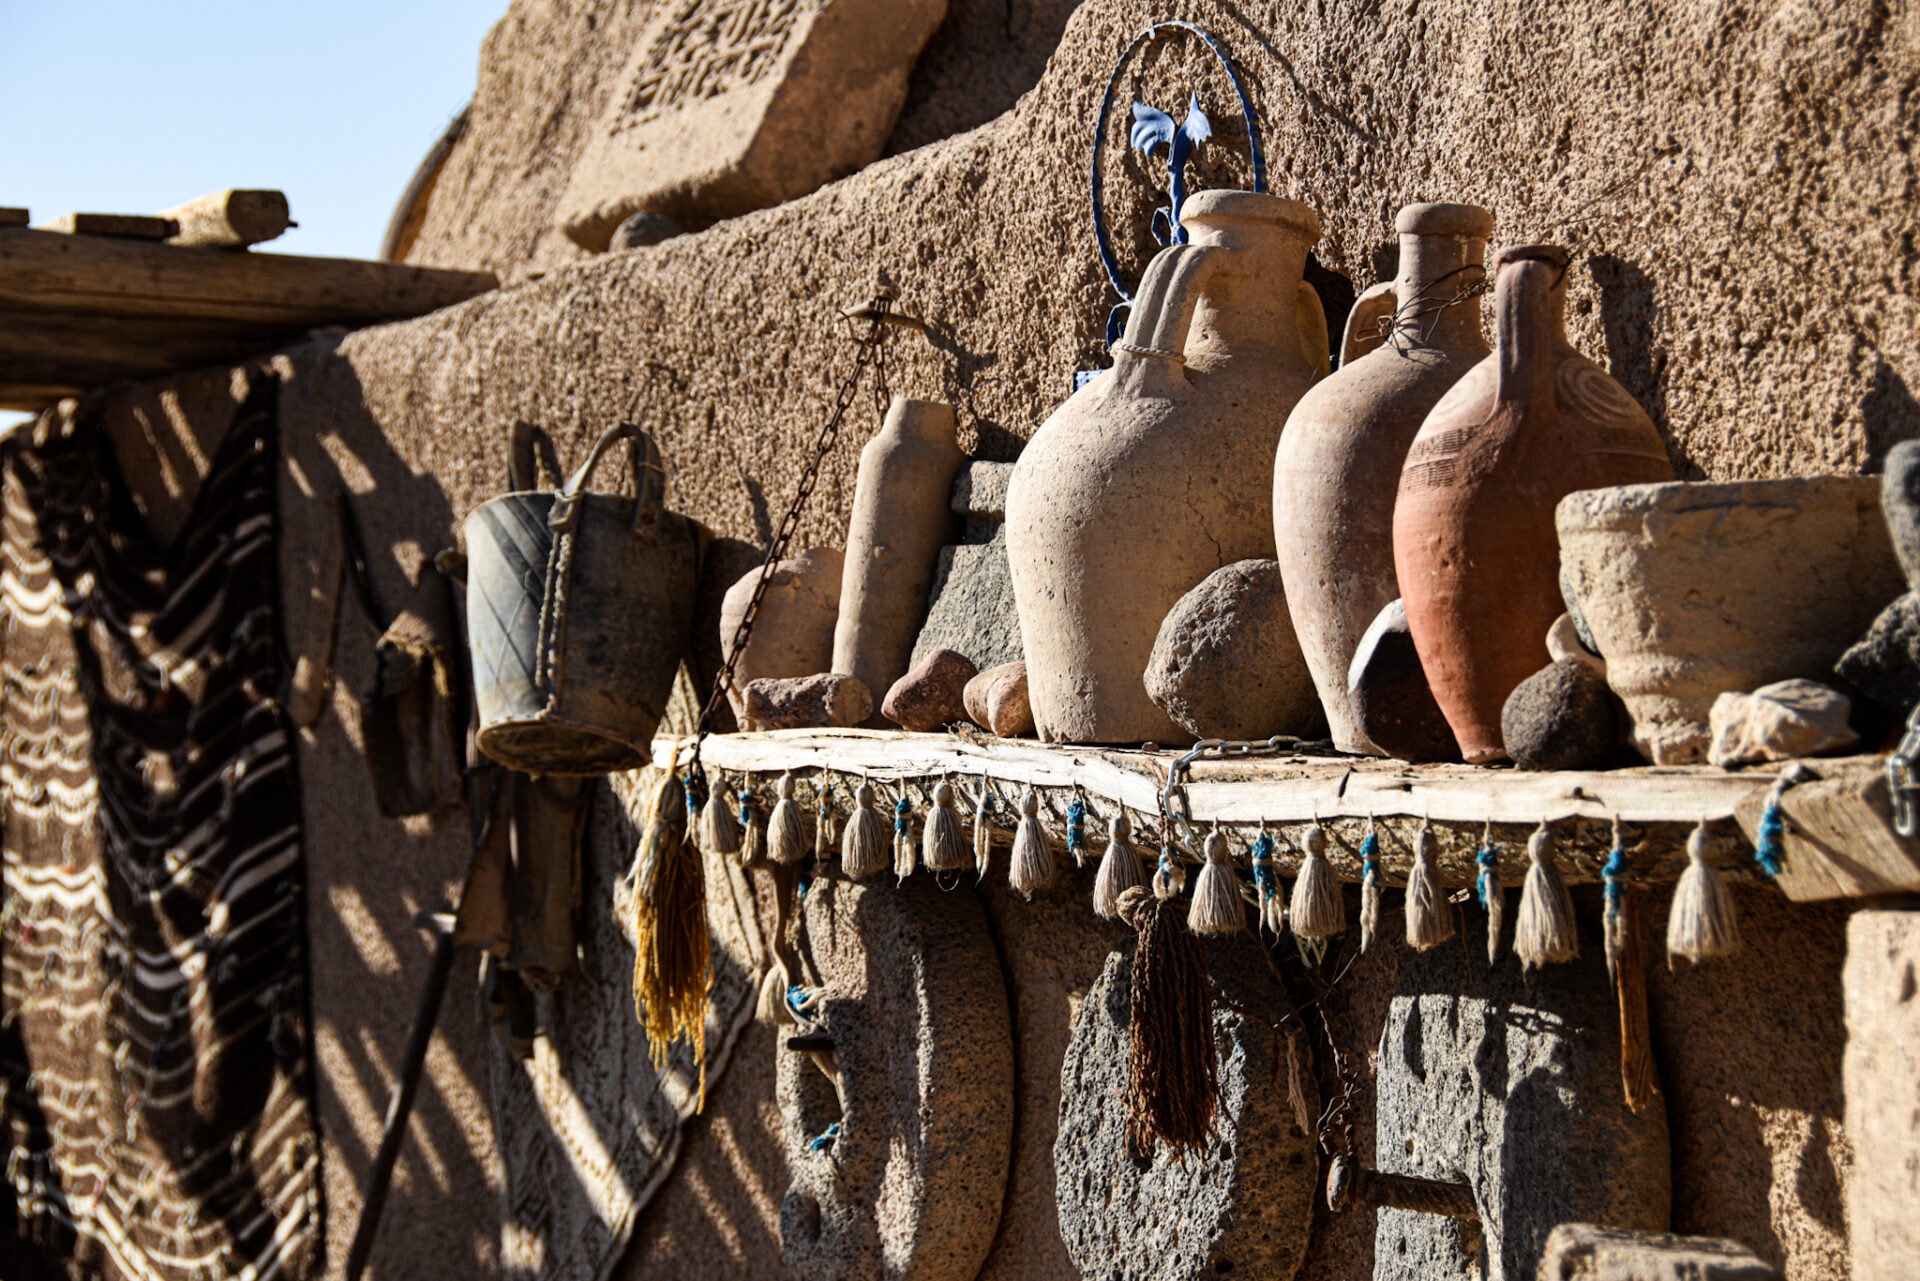 old ceramic jars sit on a wooden shelf on the outside of an adobe wall in Harran